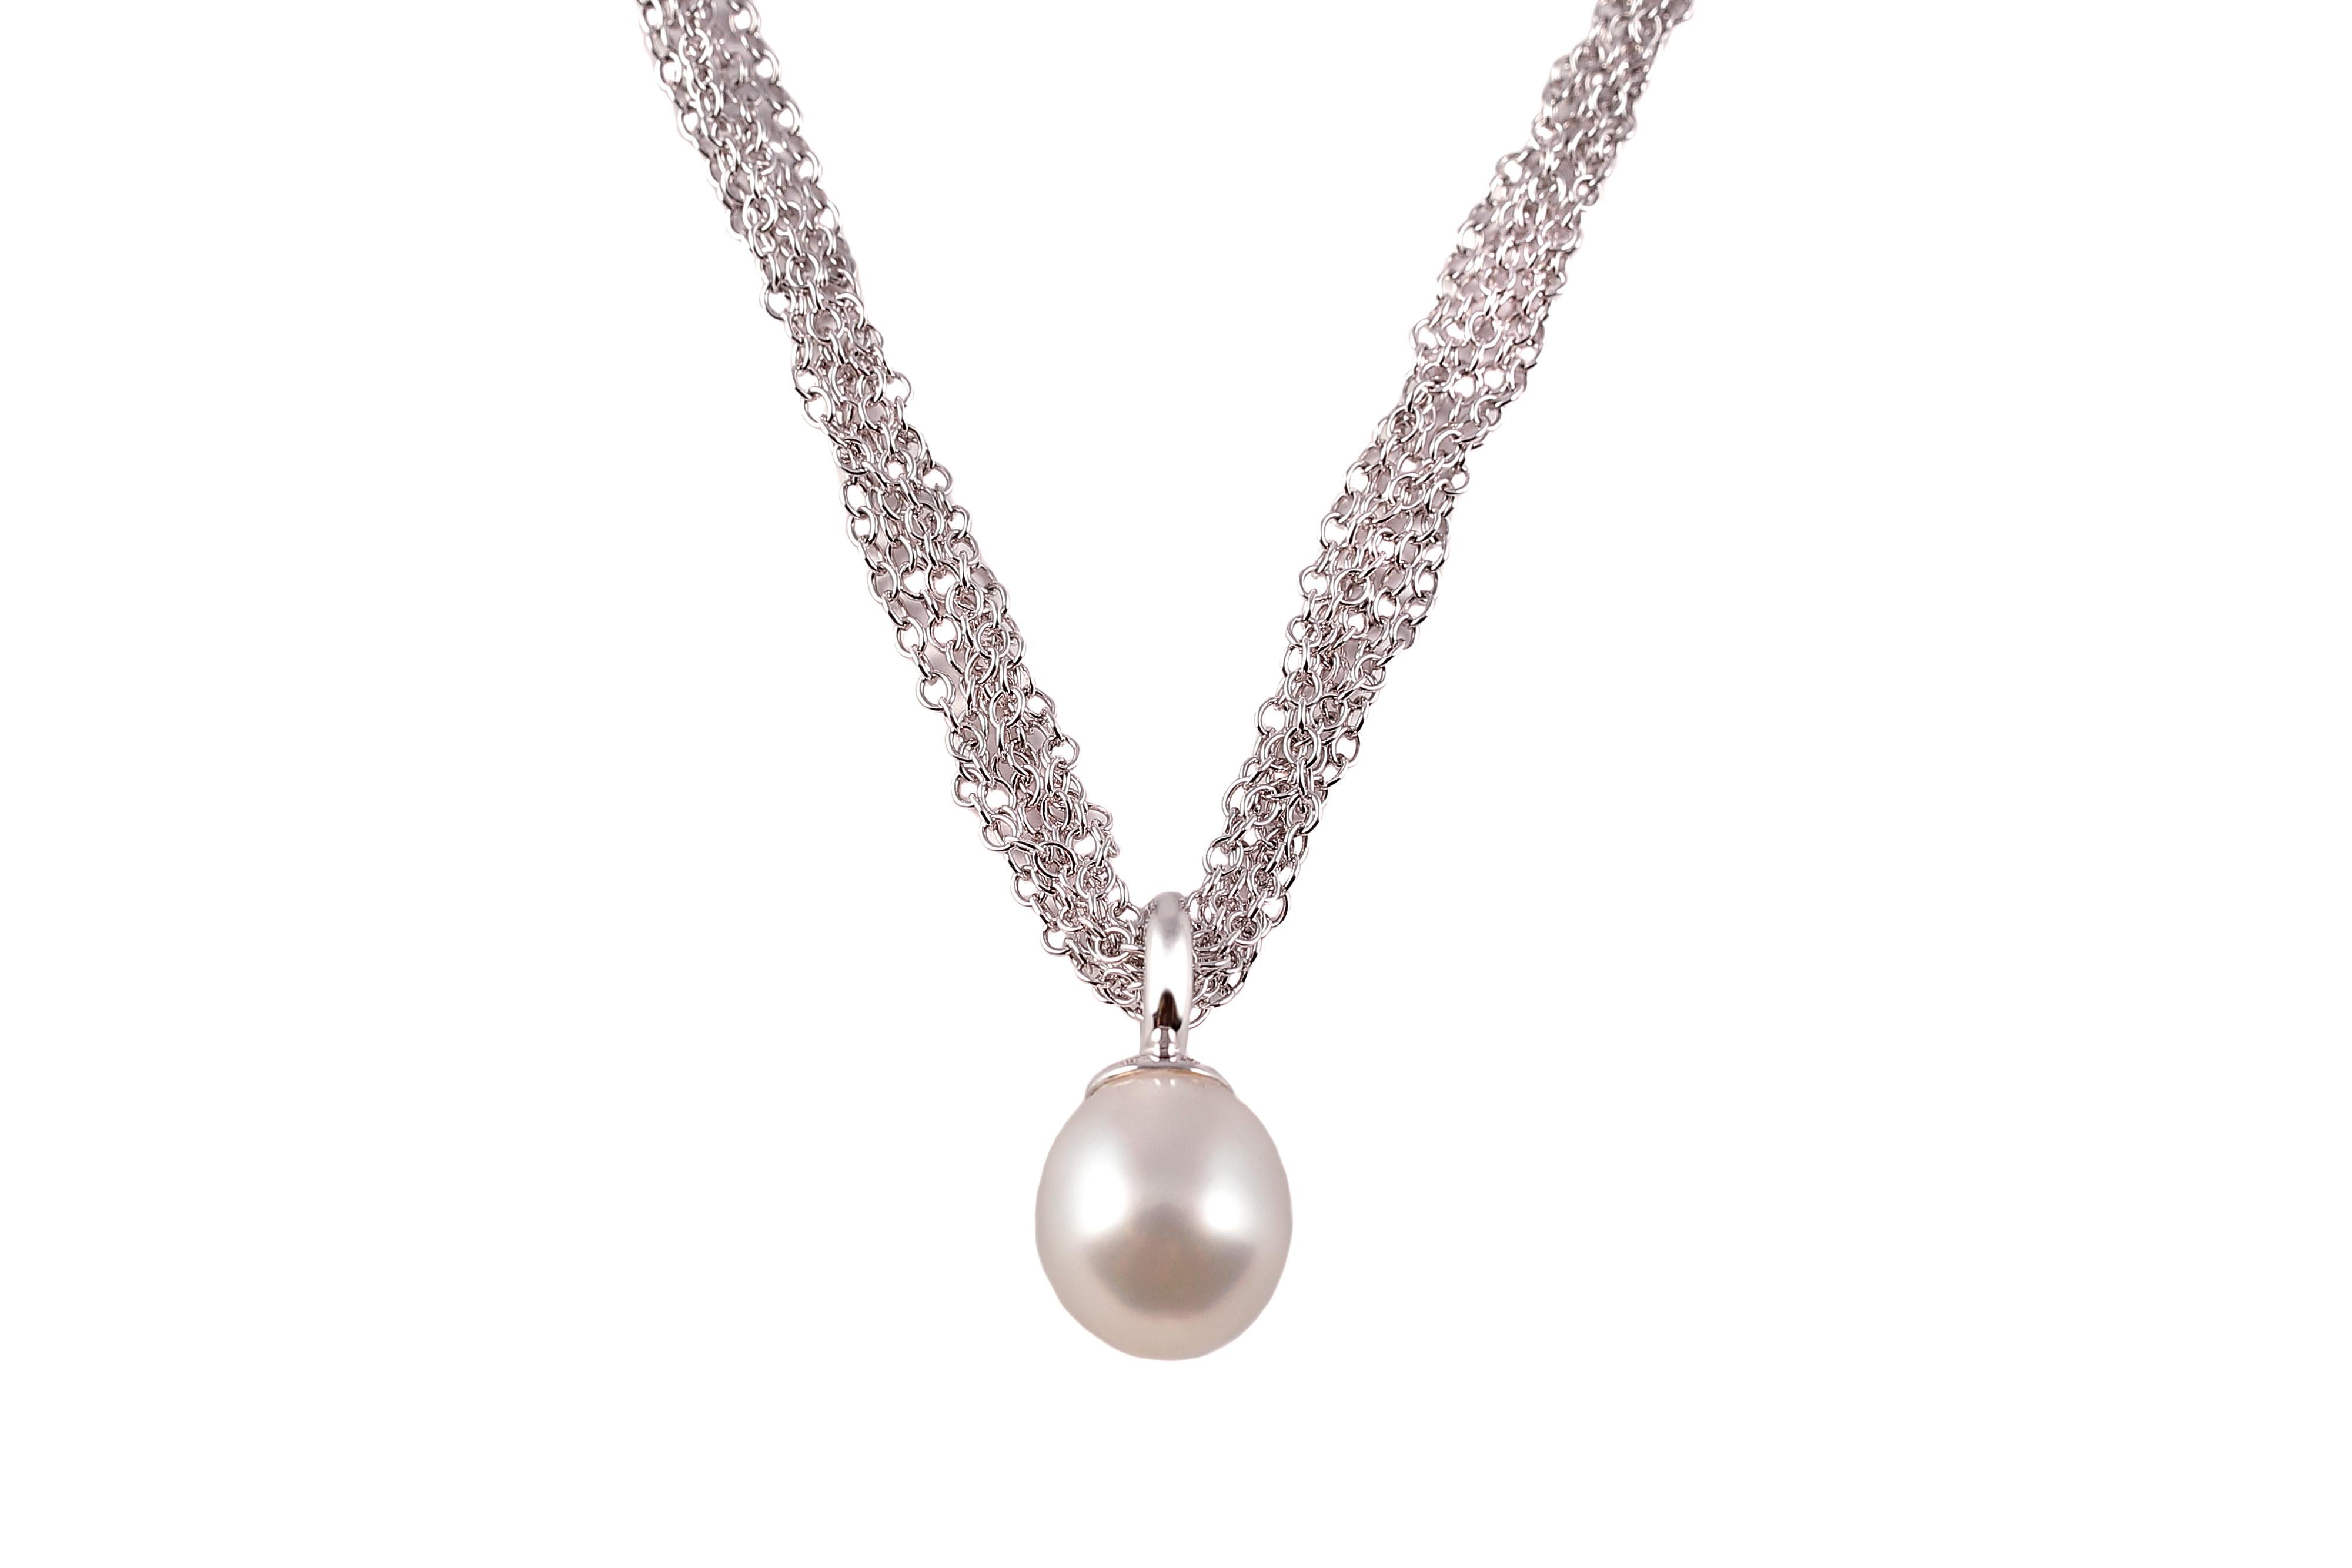 Fun and swingy! This 10.50 mm x 12.00 mm cultured pearl is suspended from a 6 row, interlocking link chain which is secured with a toggle clasp.